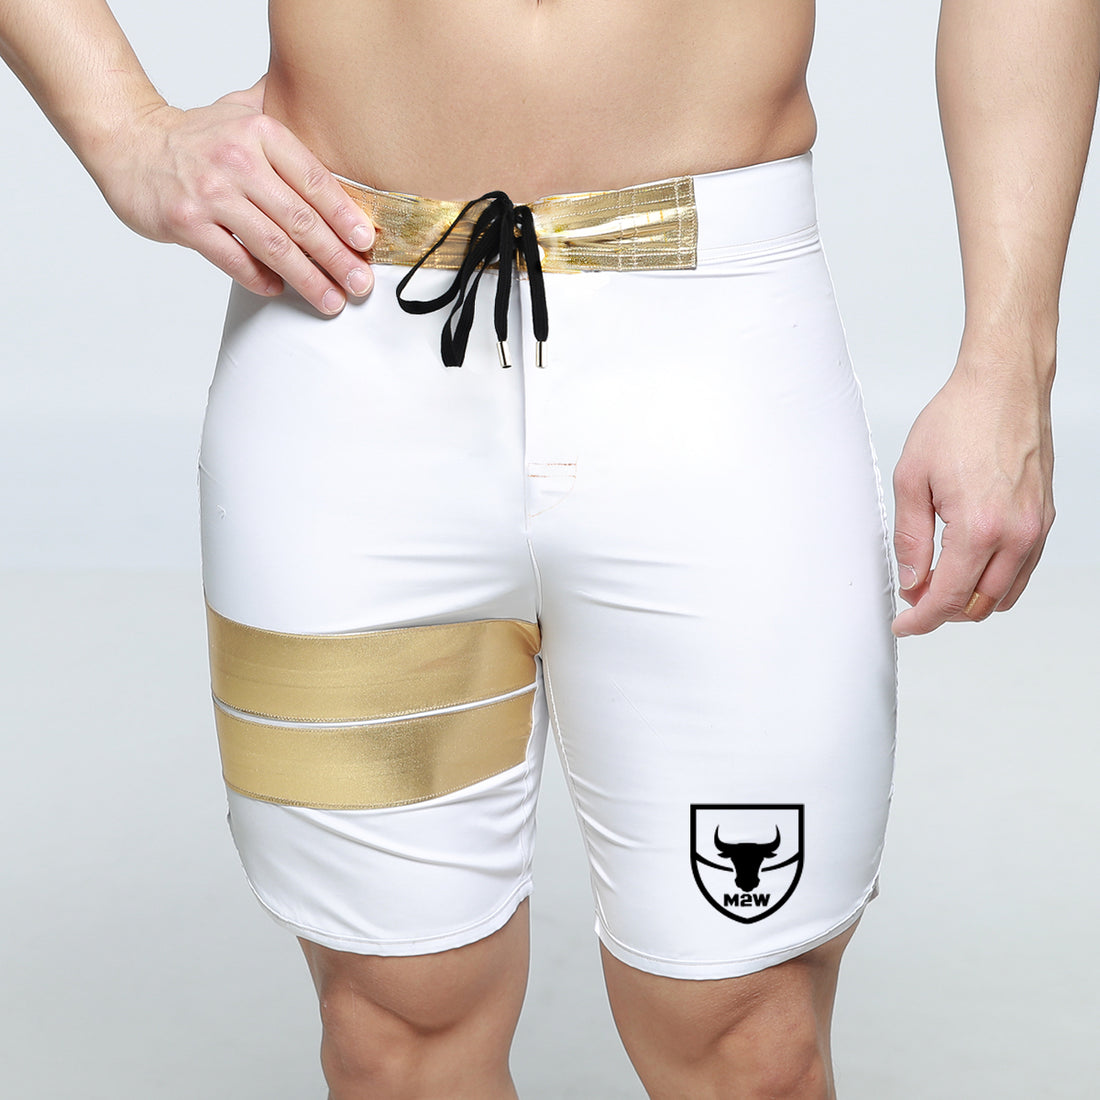 [MetroMuscleWear] Gold Physique Board Short (4716-23)